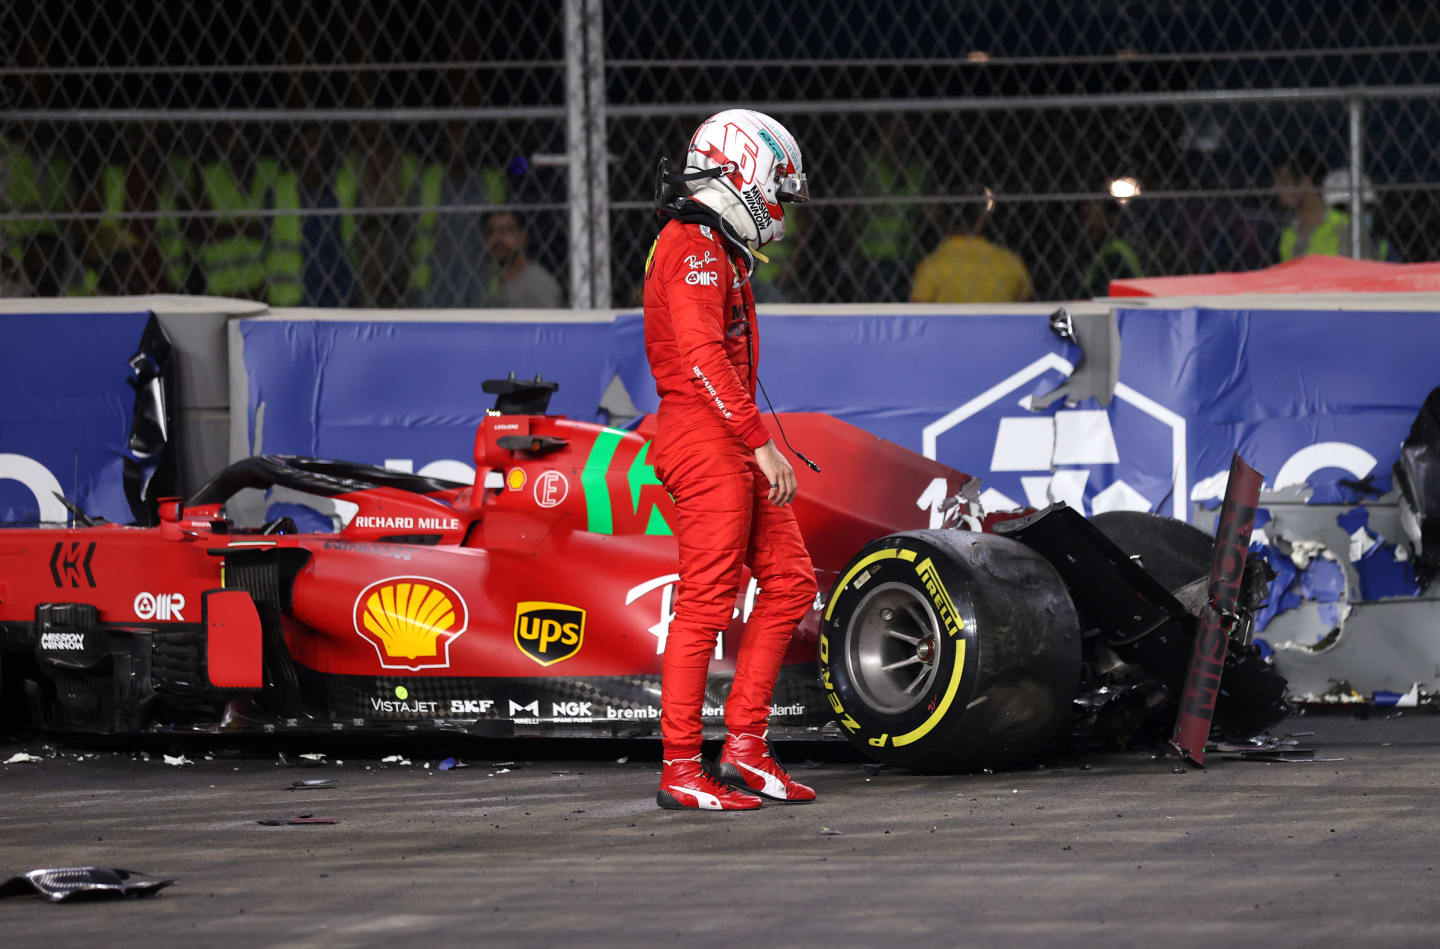 JEDDAH, SAUDI ARABIA - DECEMBER 03: Charles Leclerc of Monaco and Ferrari looks at his car after crashing during practice ahead of the F1 Grand Prix of Saudi Arabia at Jeddah Corniche Circuit on December 03, 2021 in Jeddah, Saudi Arabia. (Photo by Lars Baron/Getty Images)